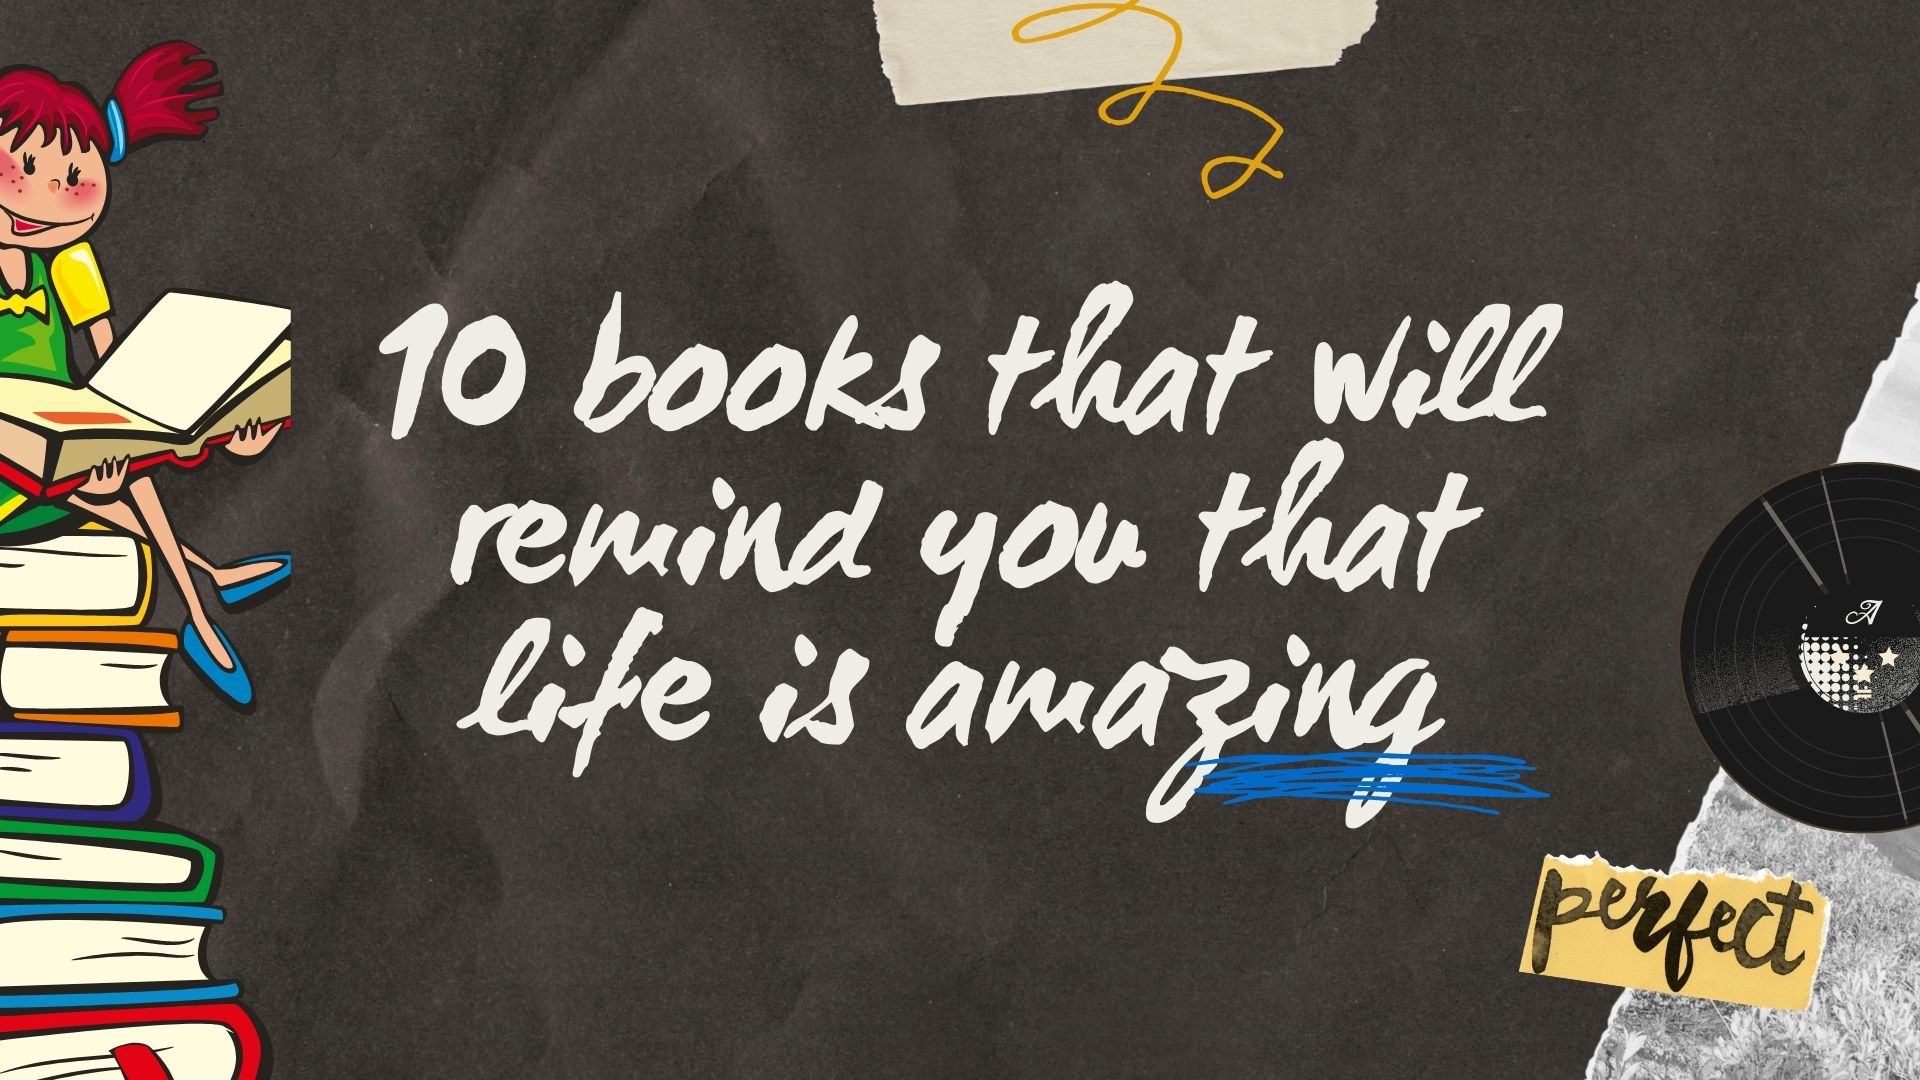 10 books that will remind you that life is amazing